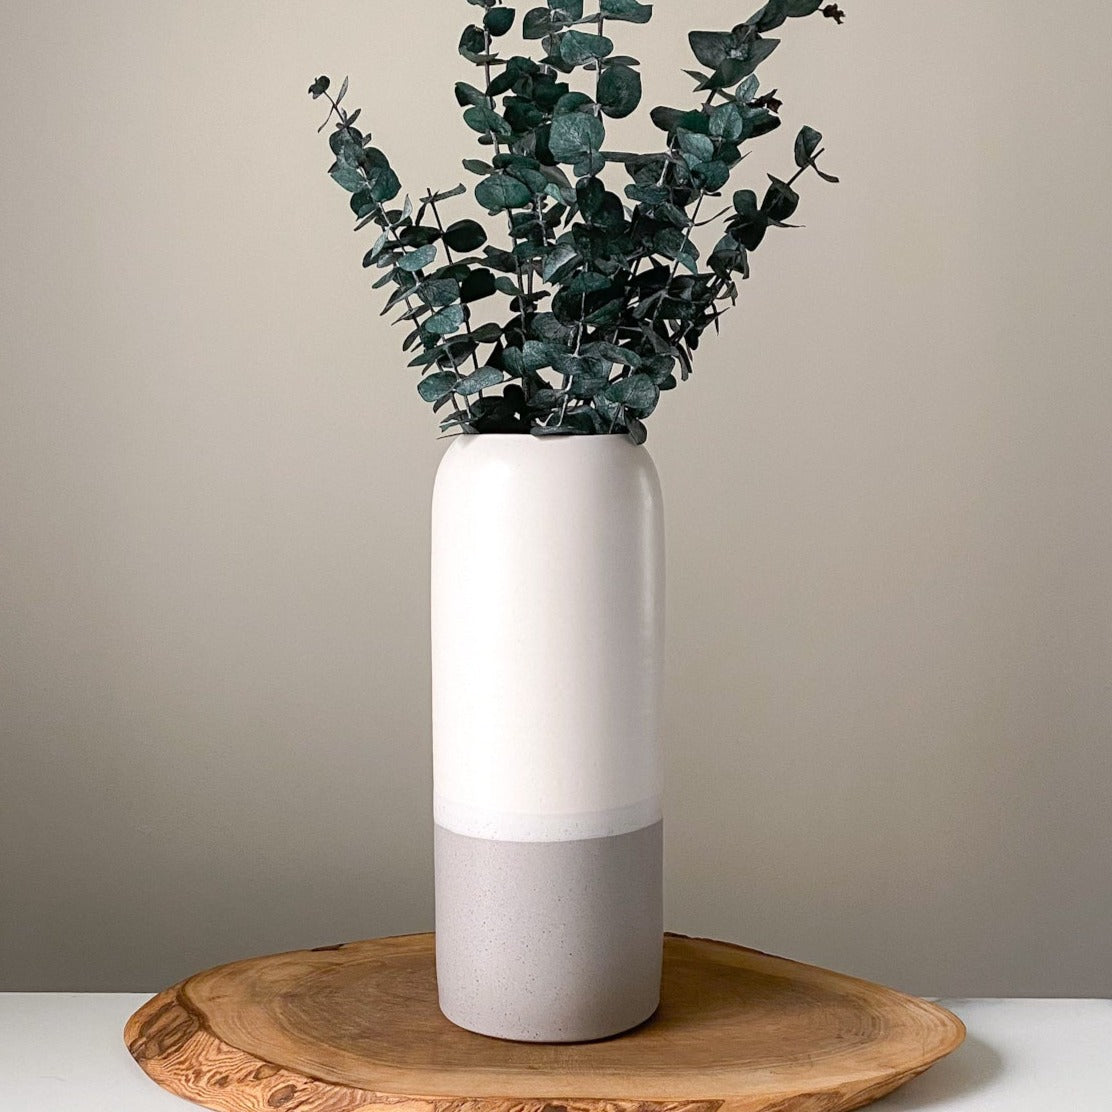 Speckle Gray Vases